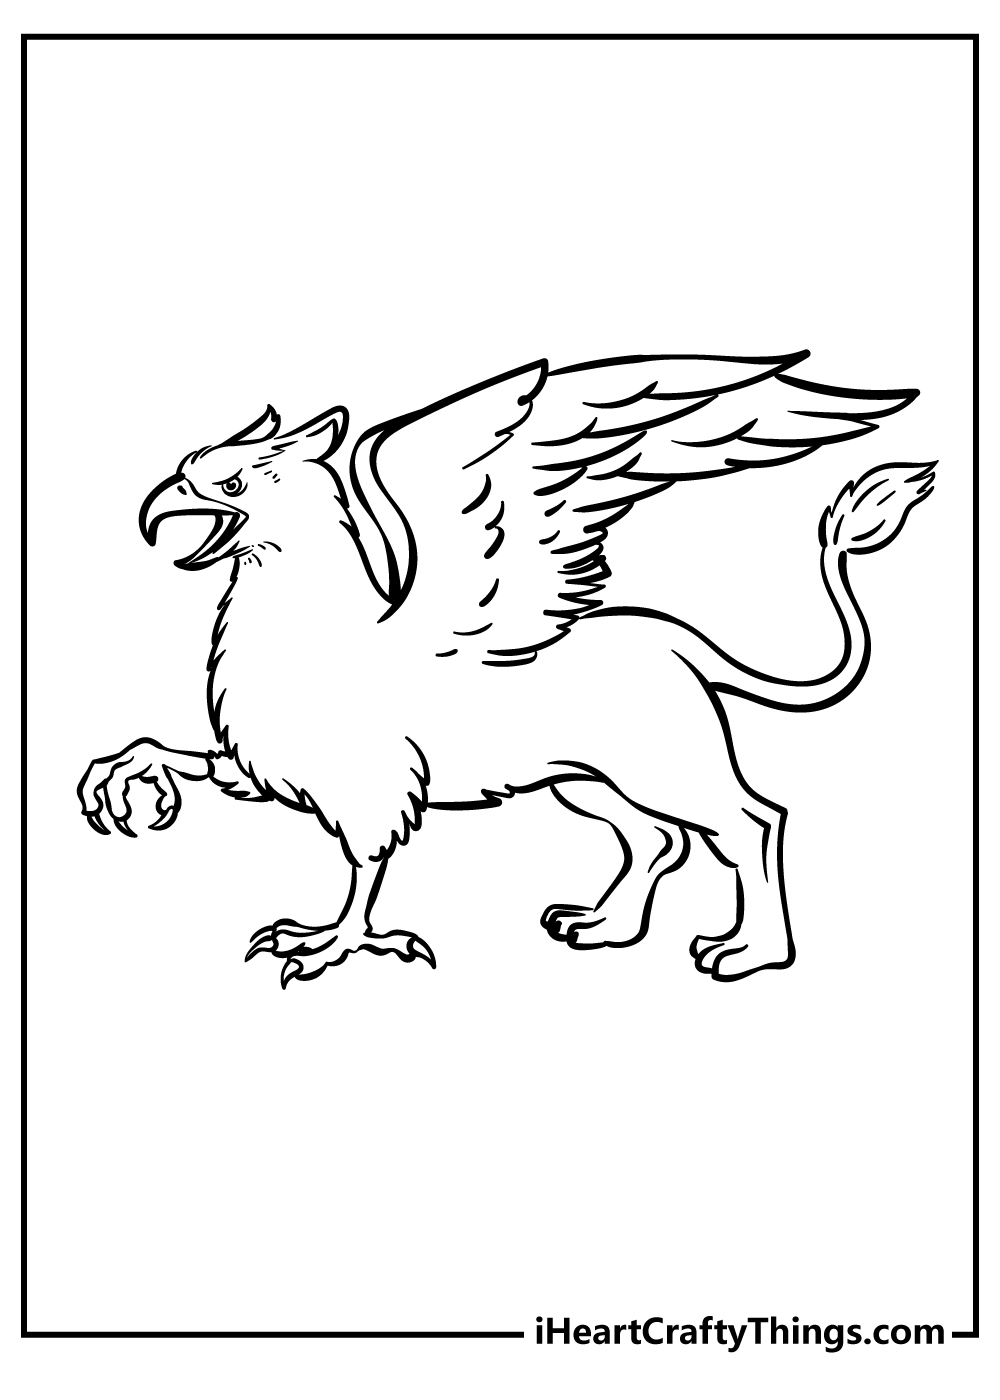 Griffin Coloring Pages for preschoolers free printable